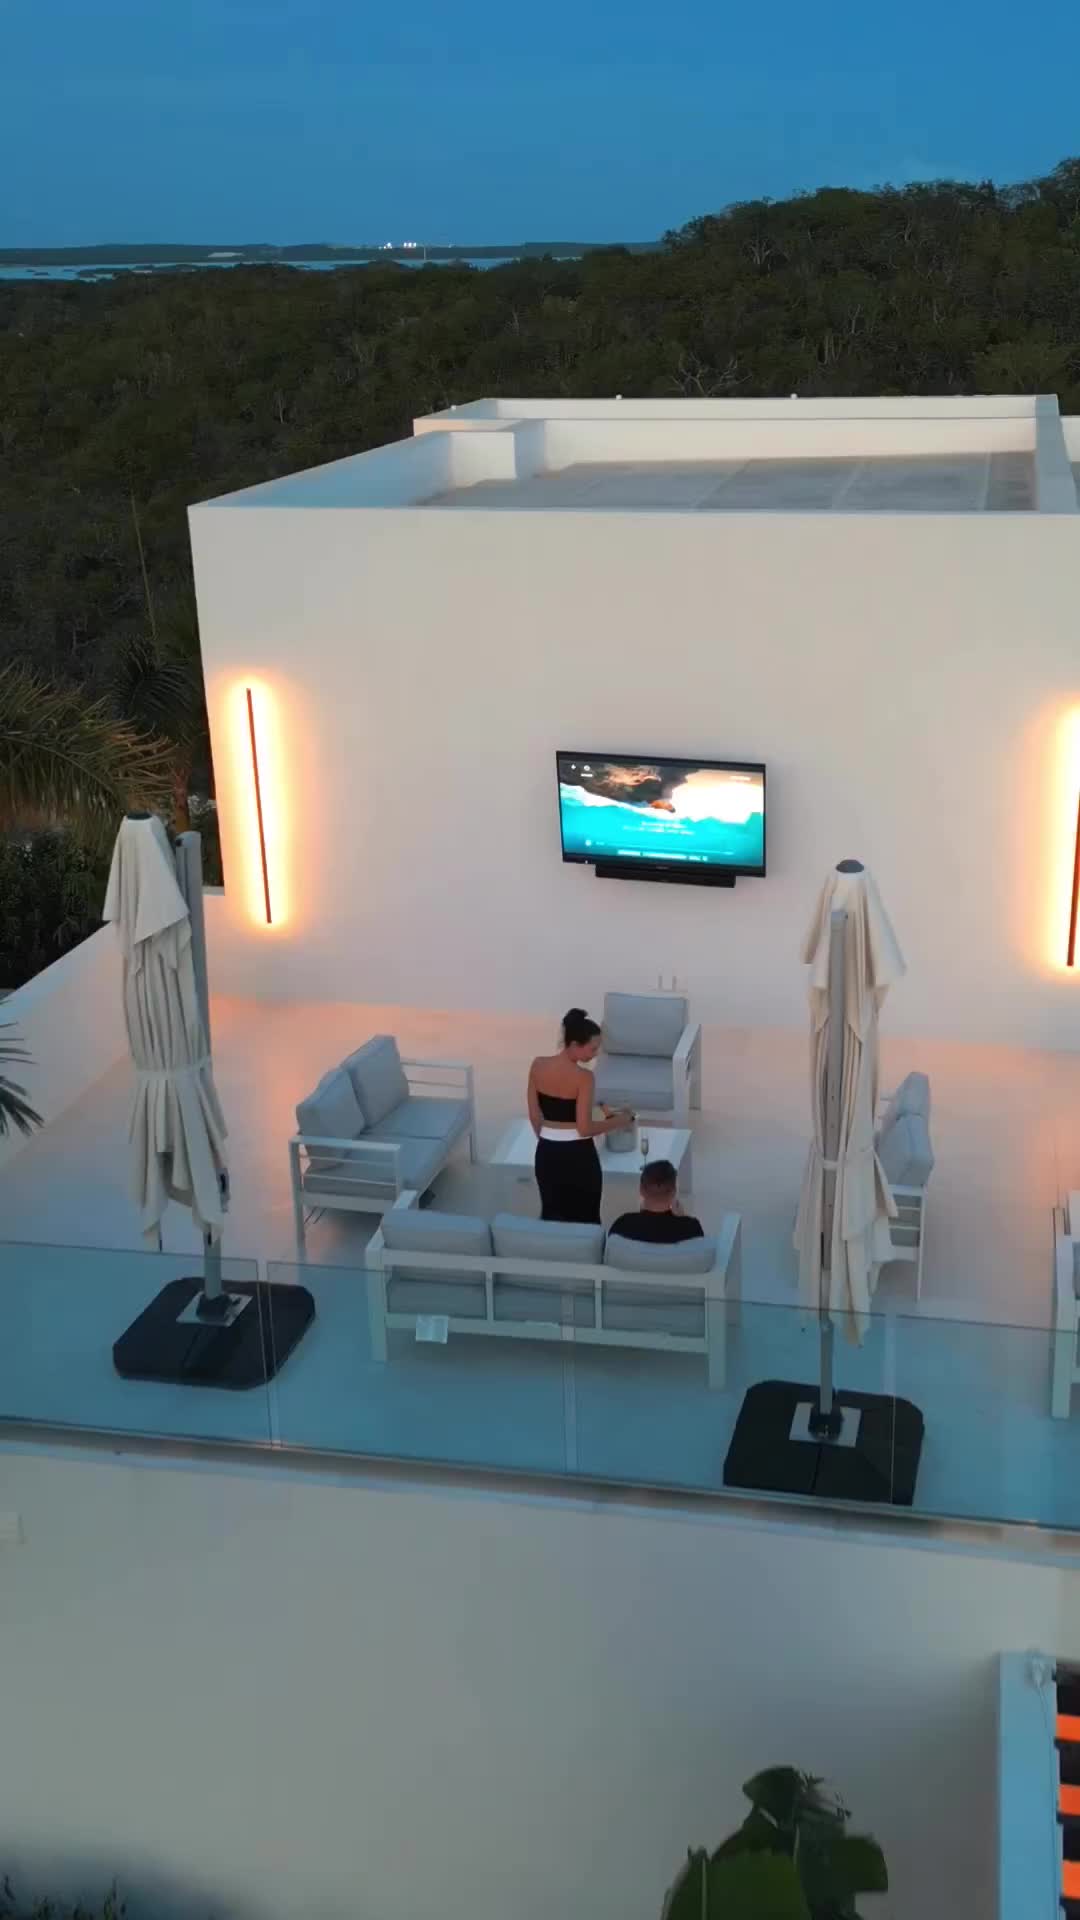 The ultimate cinema rooftop goals @villacielotci 🍿 
———
TAG someone you’d be watching your favourite movie here with! 

#turksandcaicos #cinemaroom #luxuryvillas #travelgoals #megamansion #travelandleisure #luxuryhomes #travelcouple #travelblogger #luxuryliving